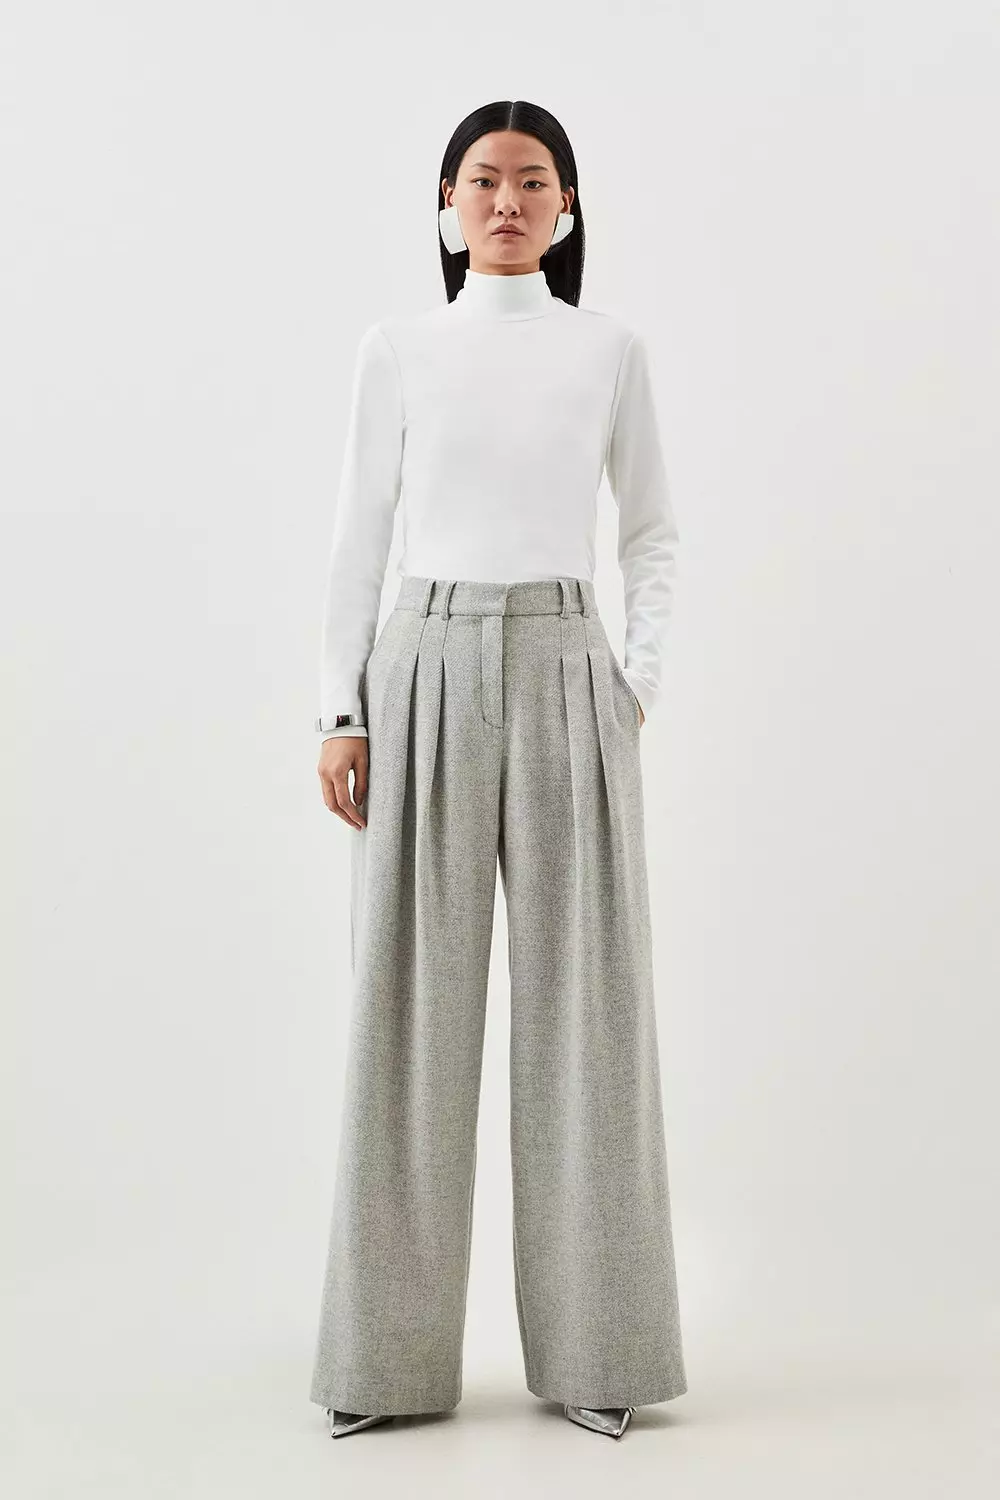 High-waisted trousers for petite women and how to style them